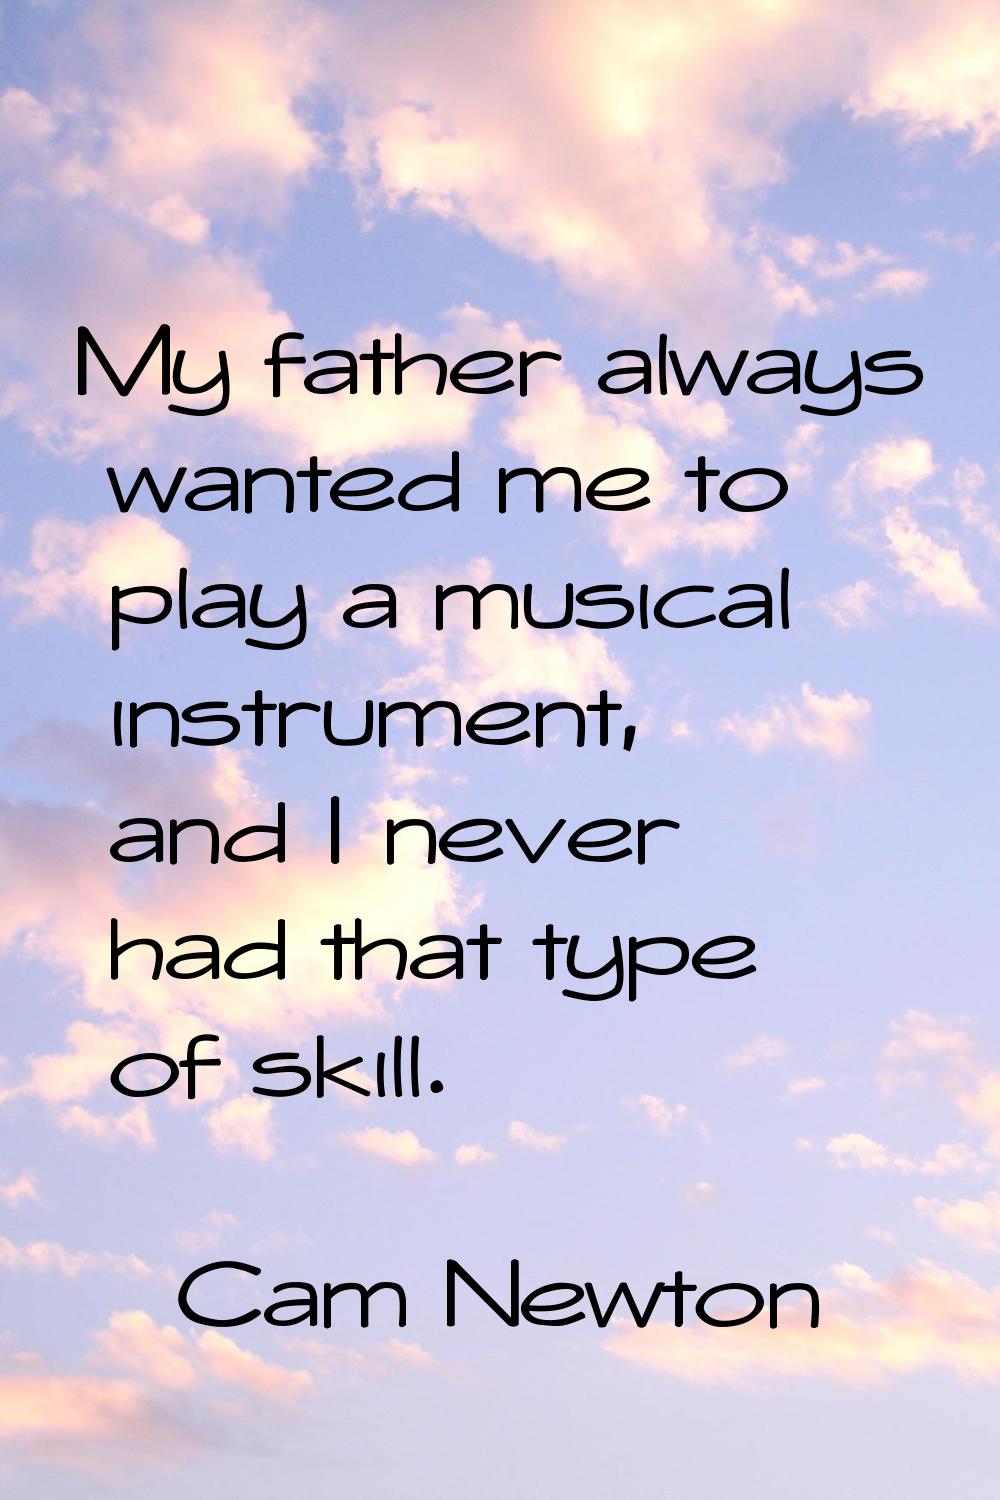 My father always wanted me to play a musical instrument, and I never had that type of skill.